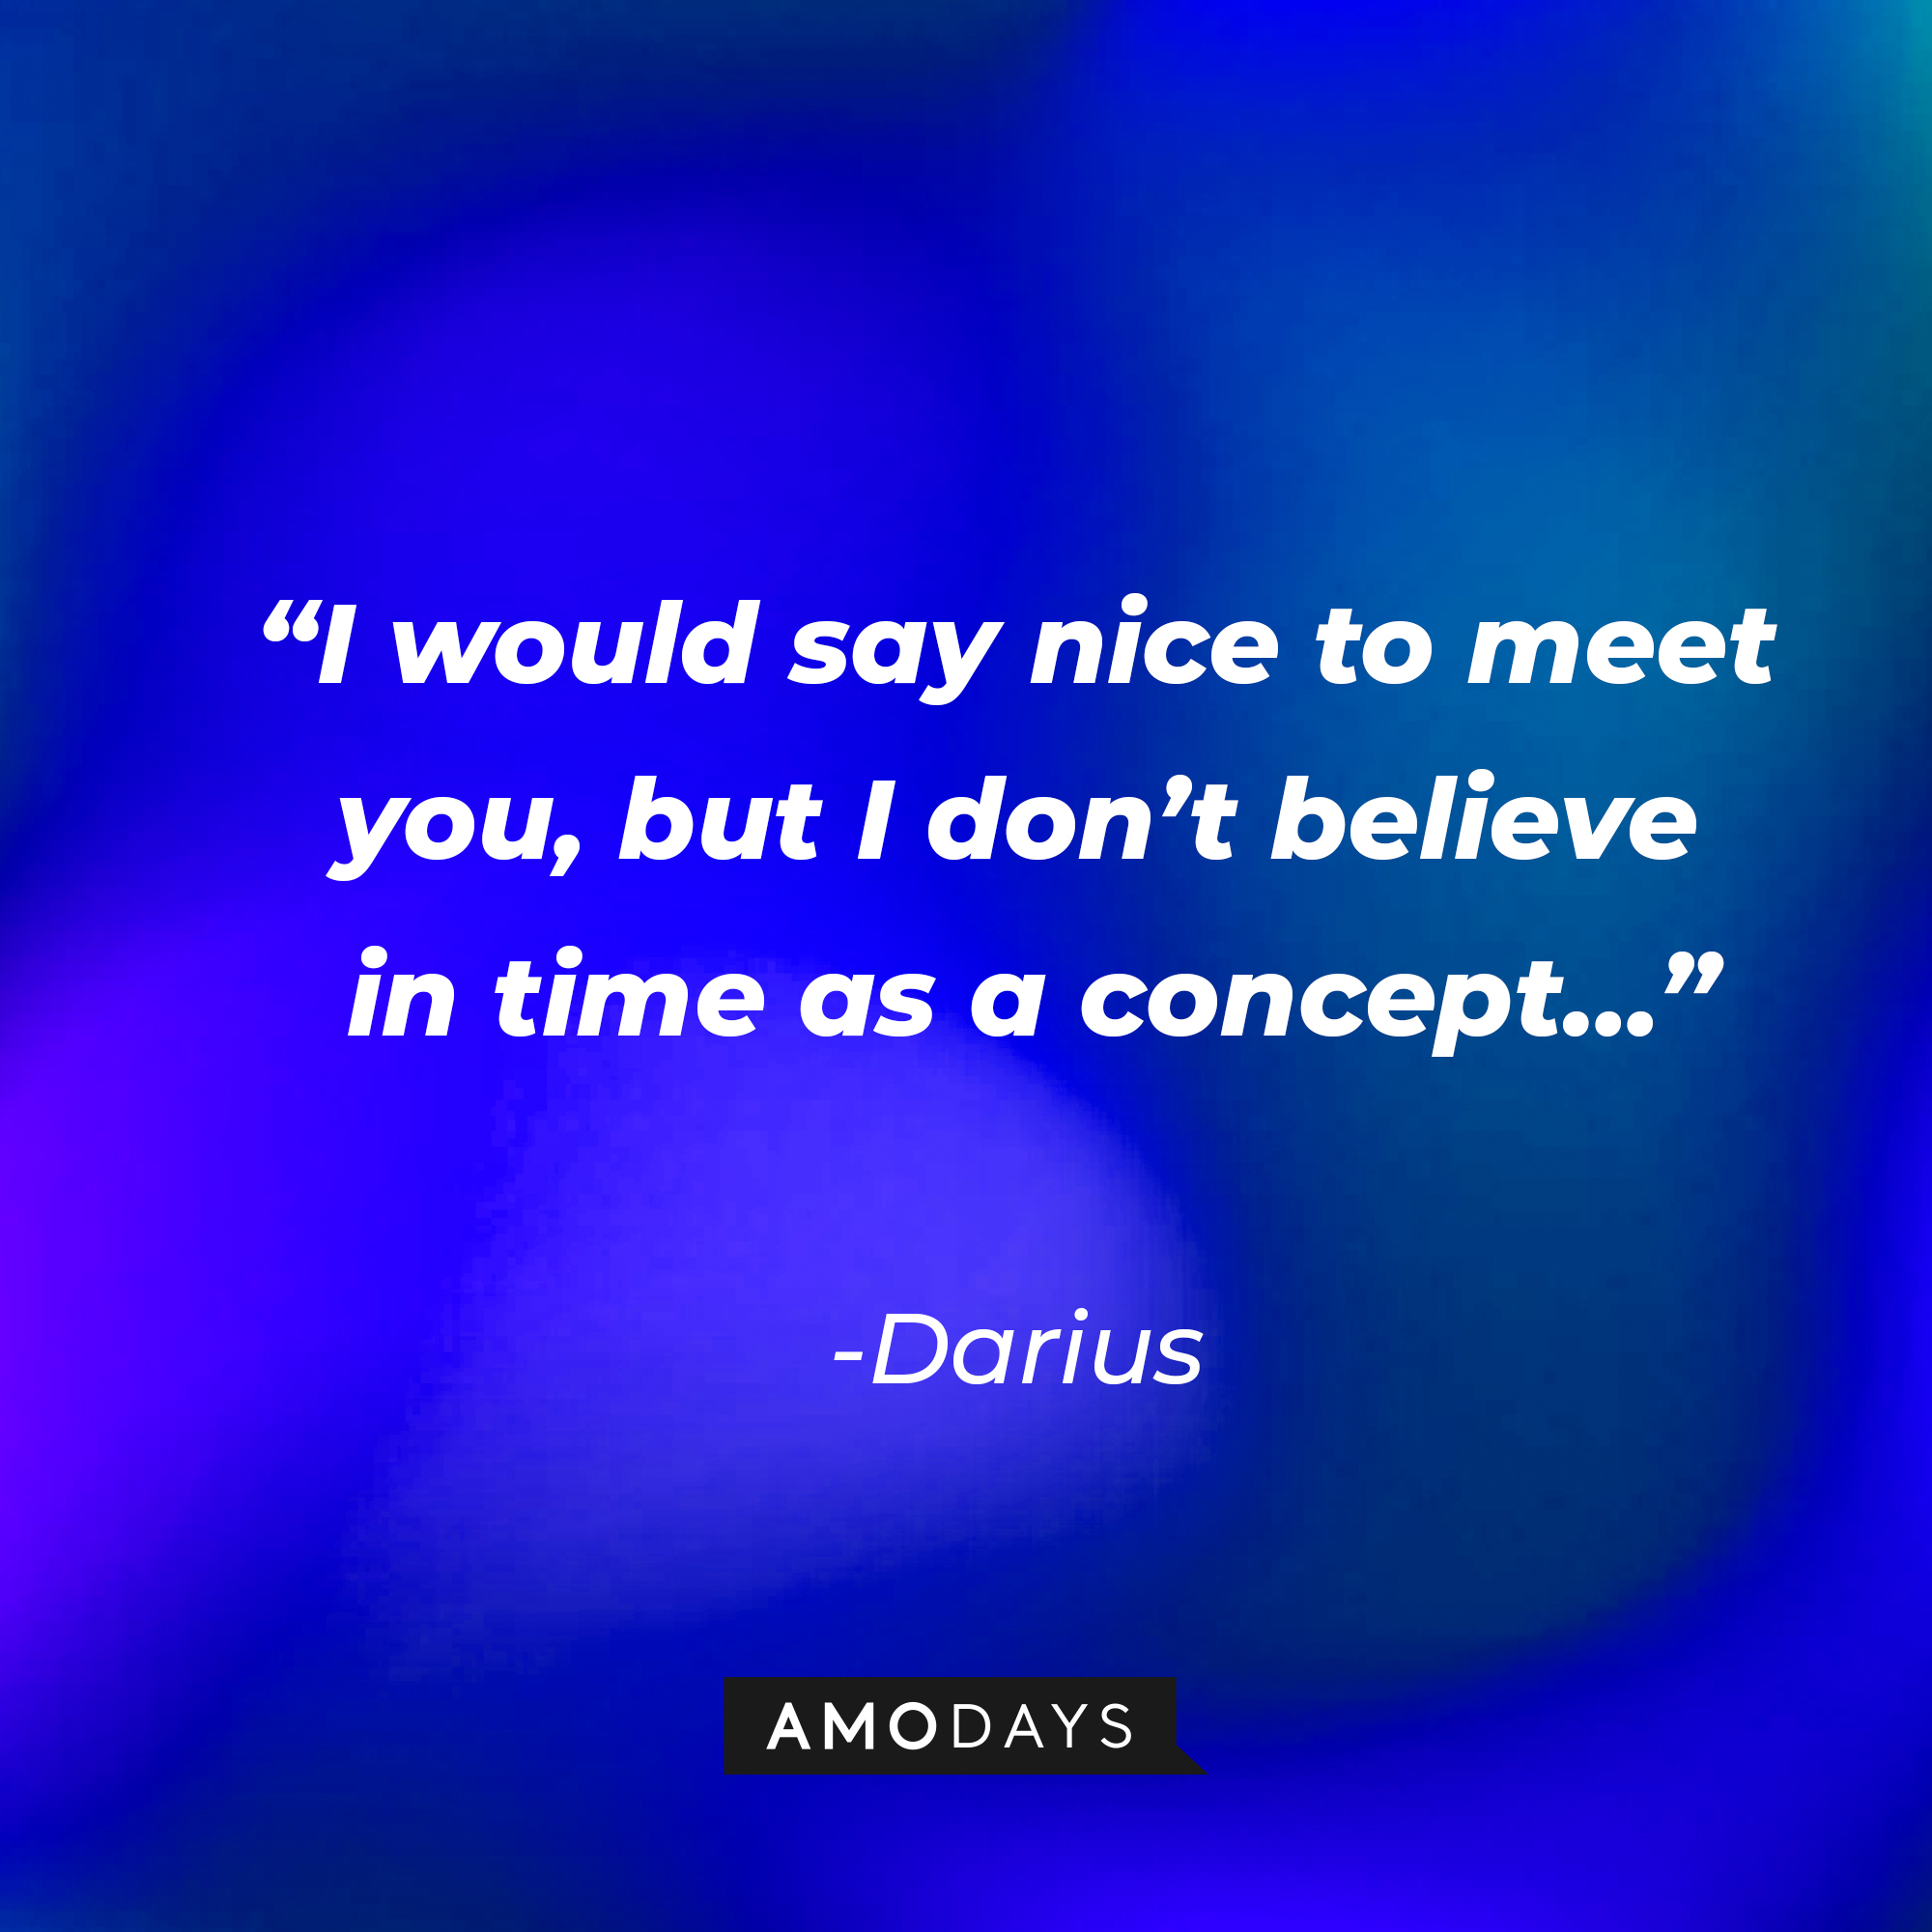 Darius’ quote: “I would say nice to meet you, but I don’t believe in time as a concept…”  | Source: AmoDays